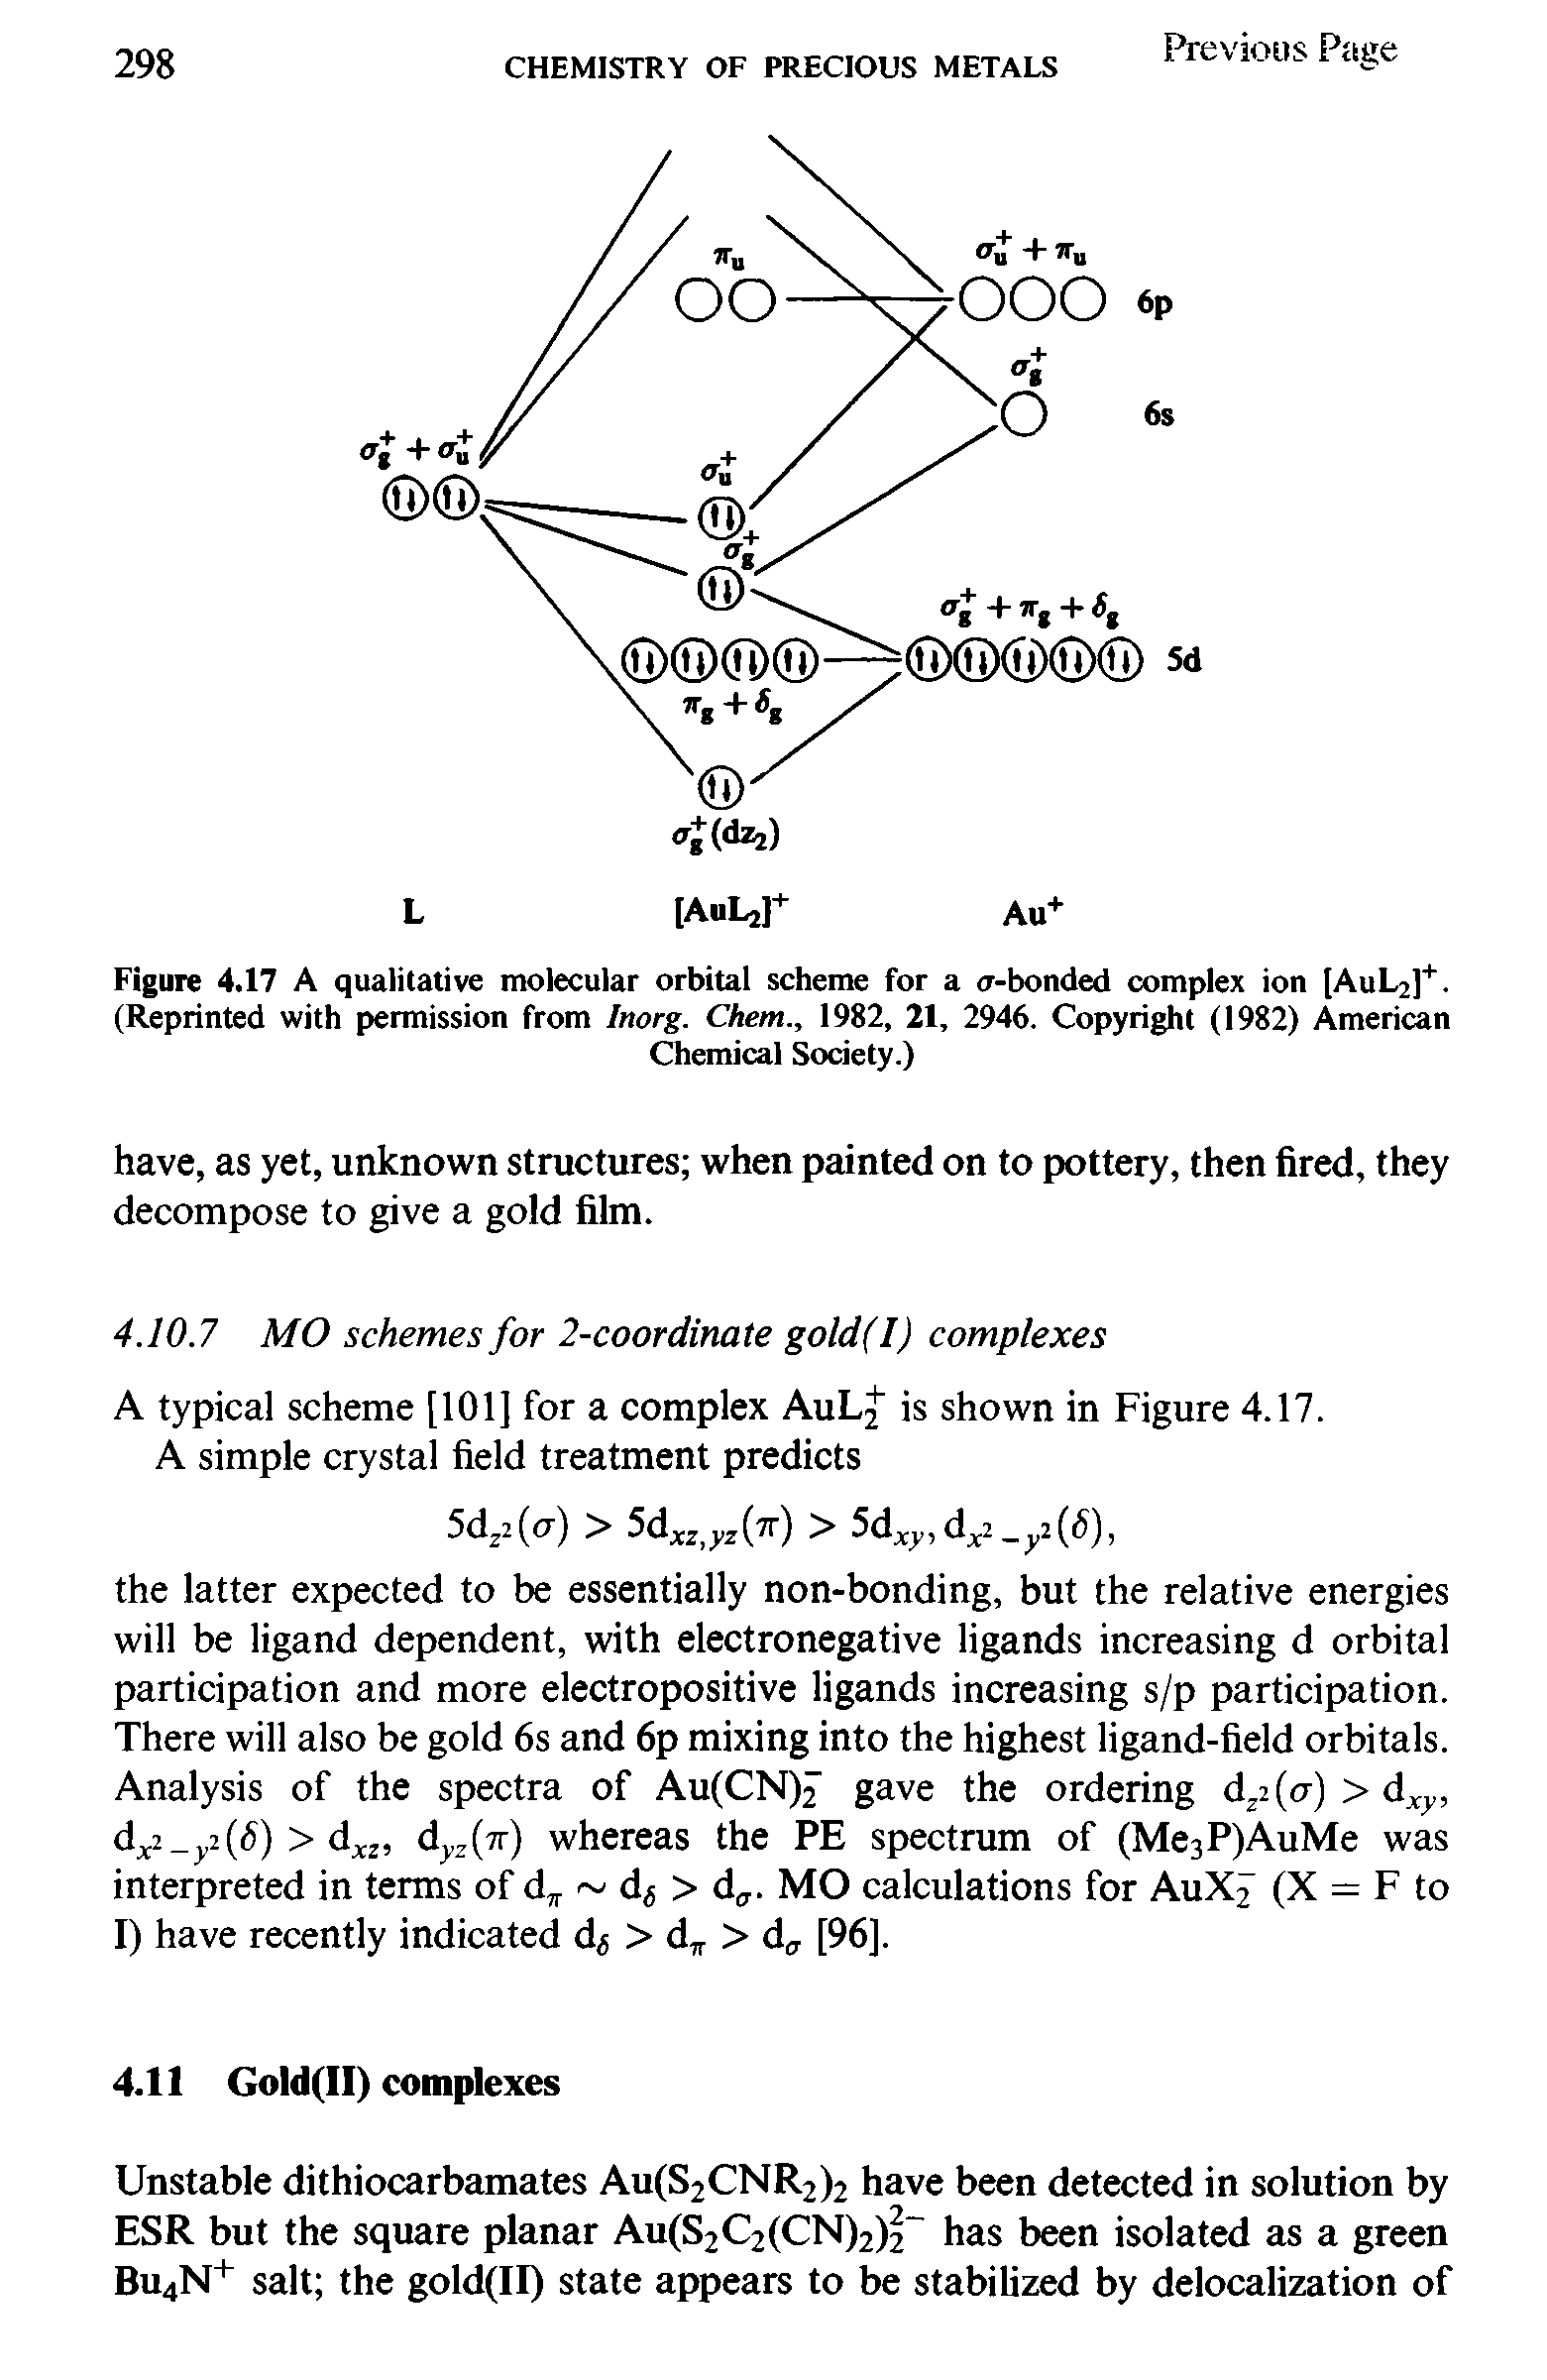 Figure 4.17 A qualitative molecular orbital scheme for a cr-bonded complex ion [AuL2]+. (Reprinted with permission from Inorg. Chem., 1982, 21, 2946. Copyright (1982) American...